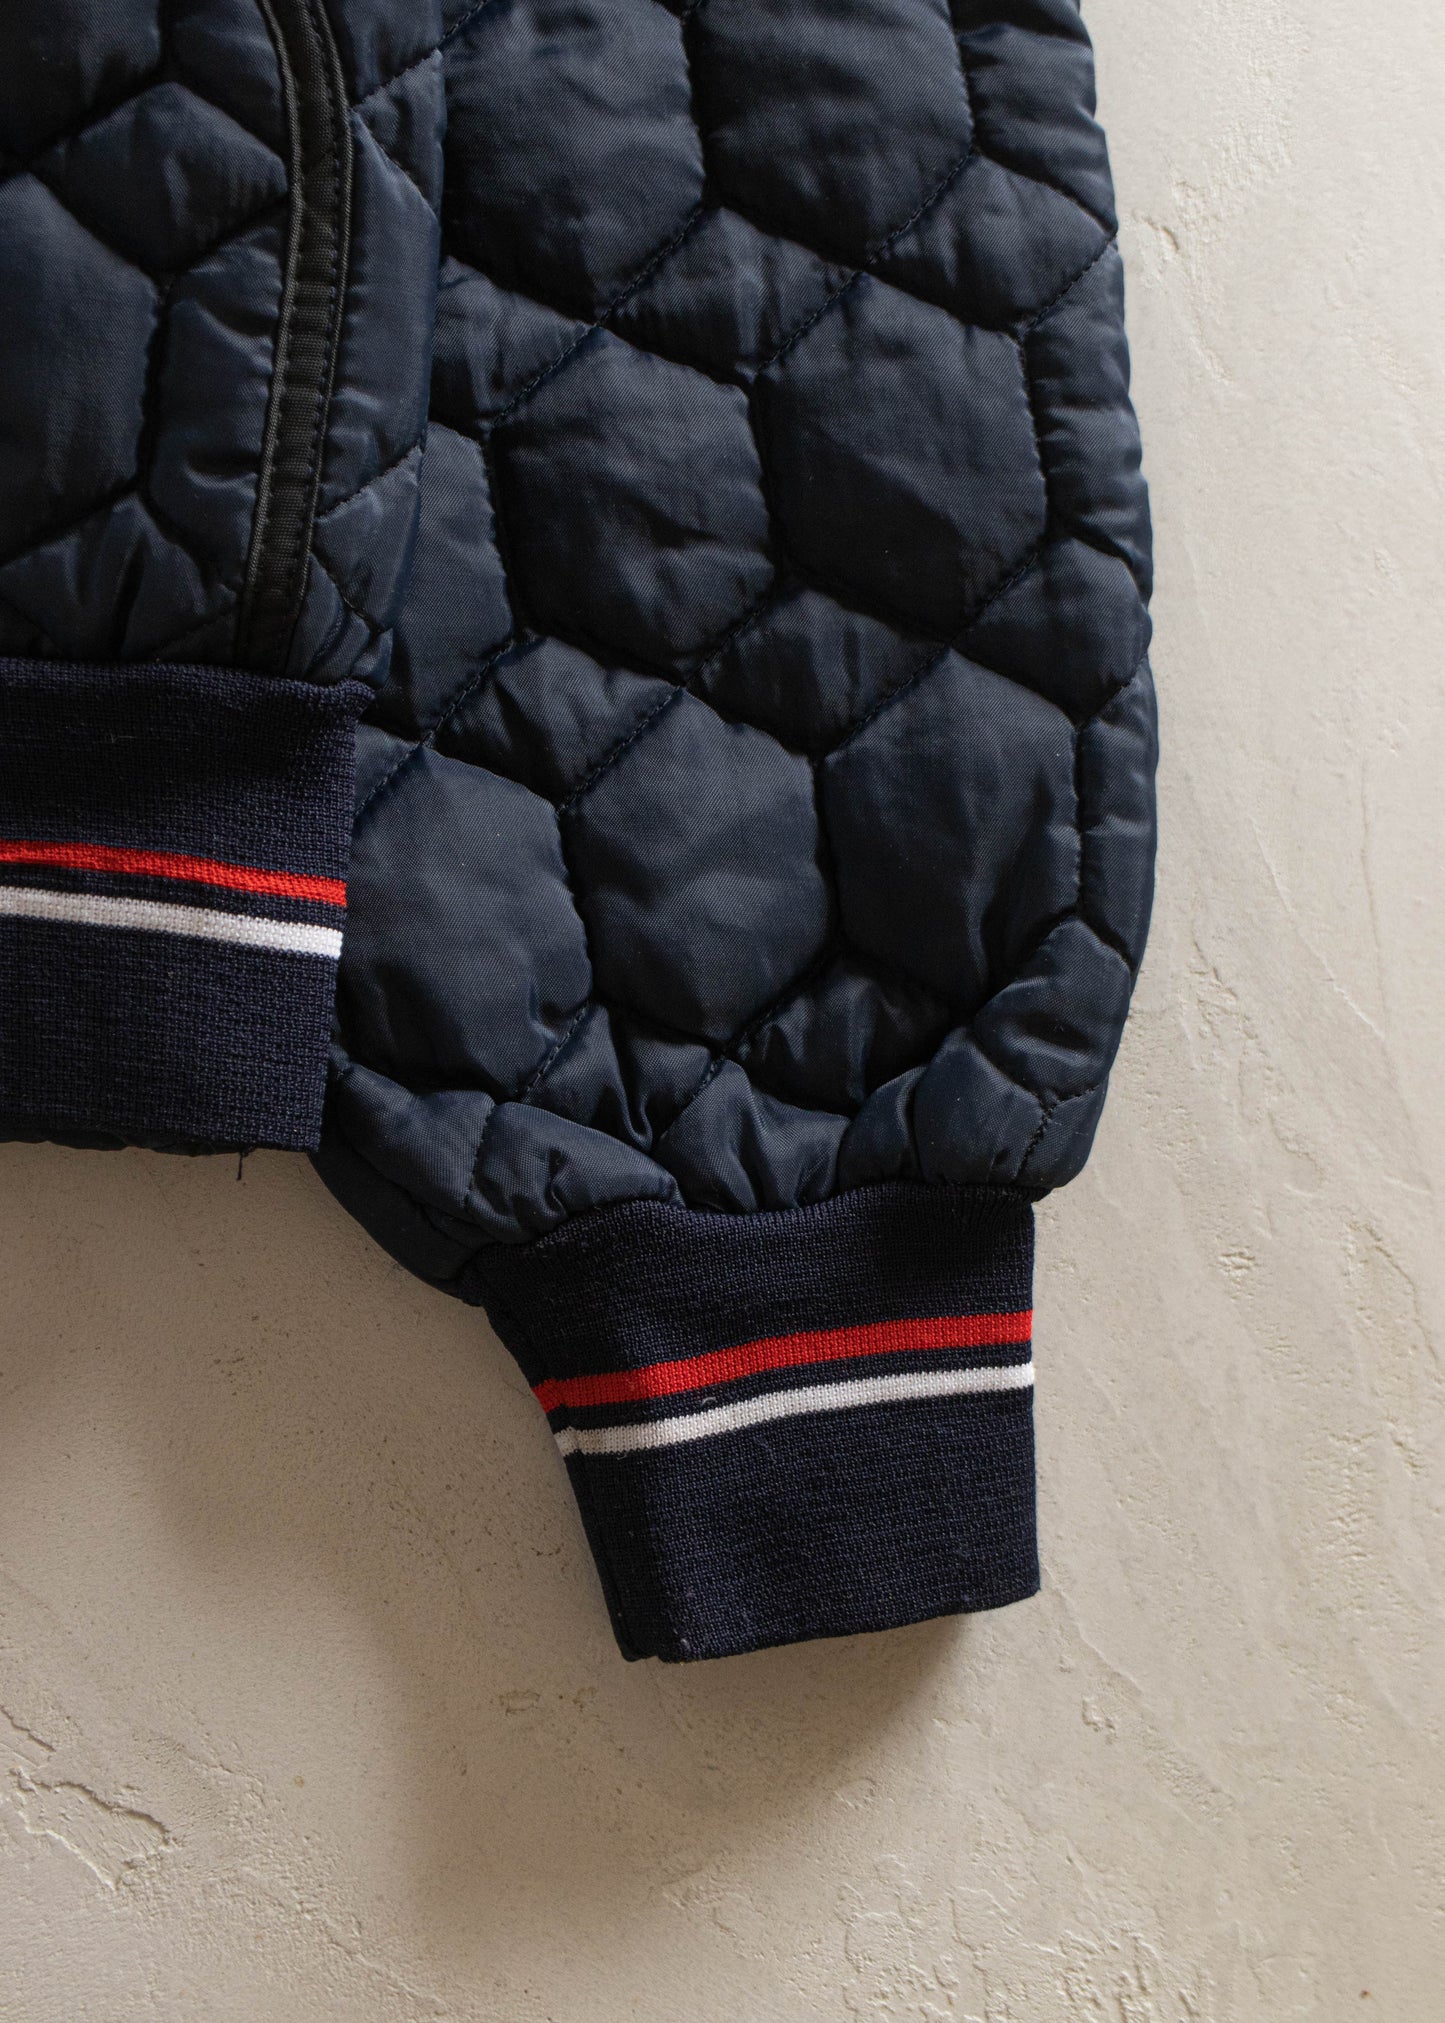 1980s Sportchief Quilted Nylon Jacket Size L/XL